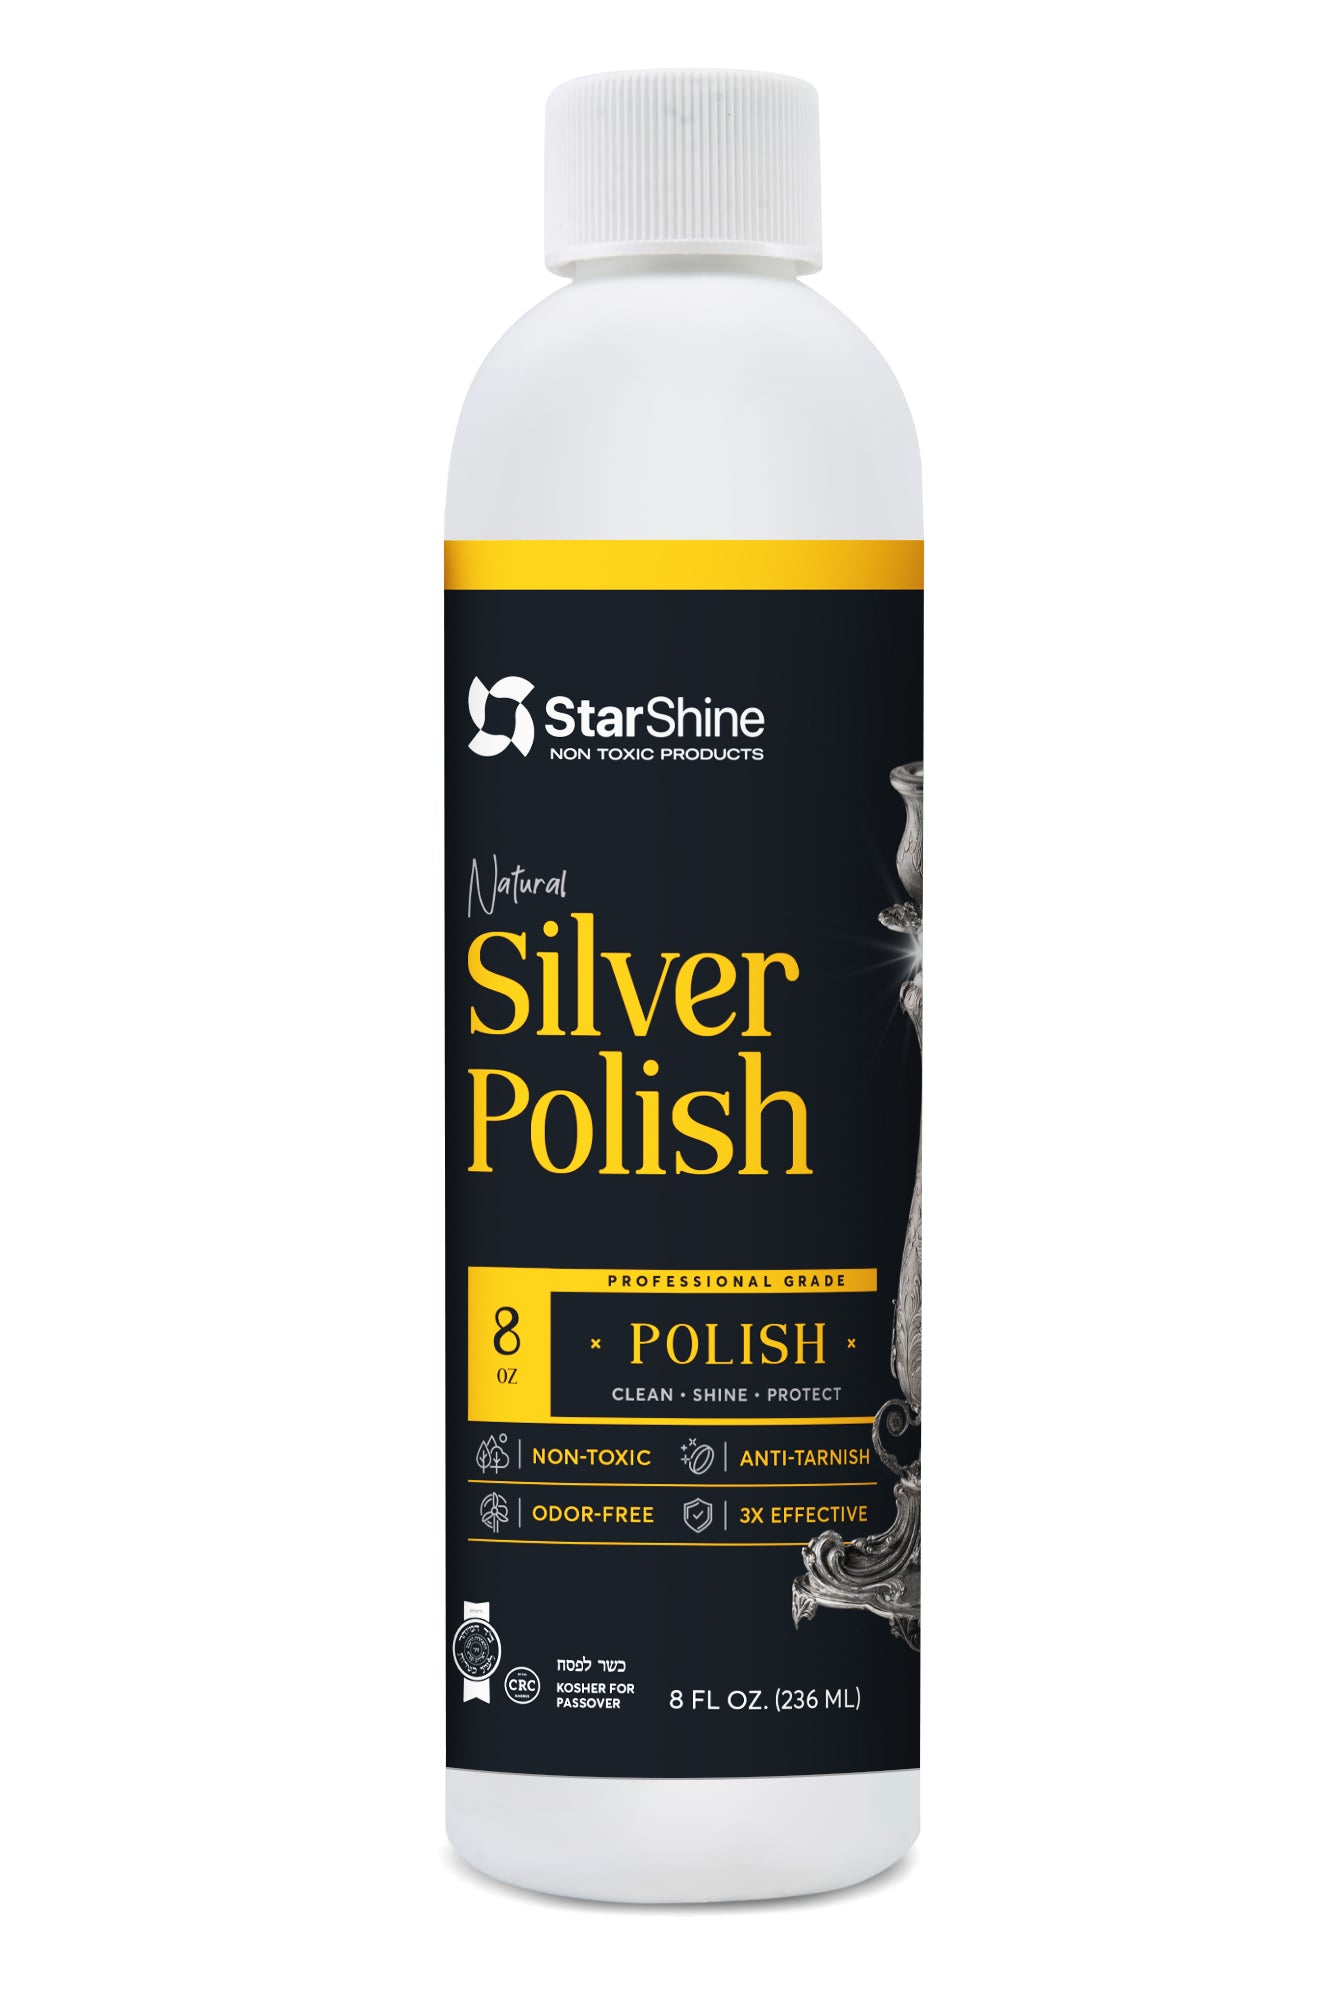 Silver Dip Cleaner Tarnish Remover 8oz Cleaning Solution